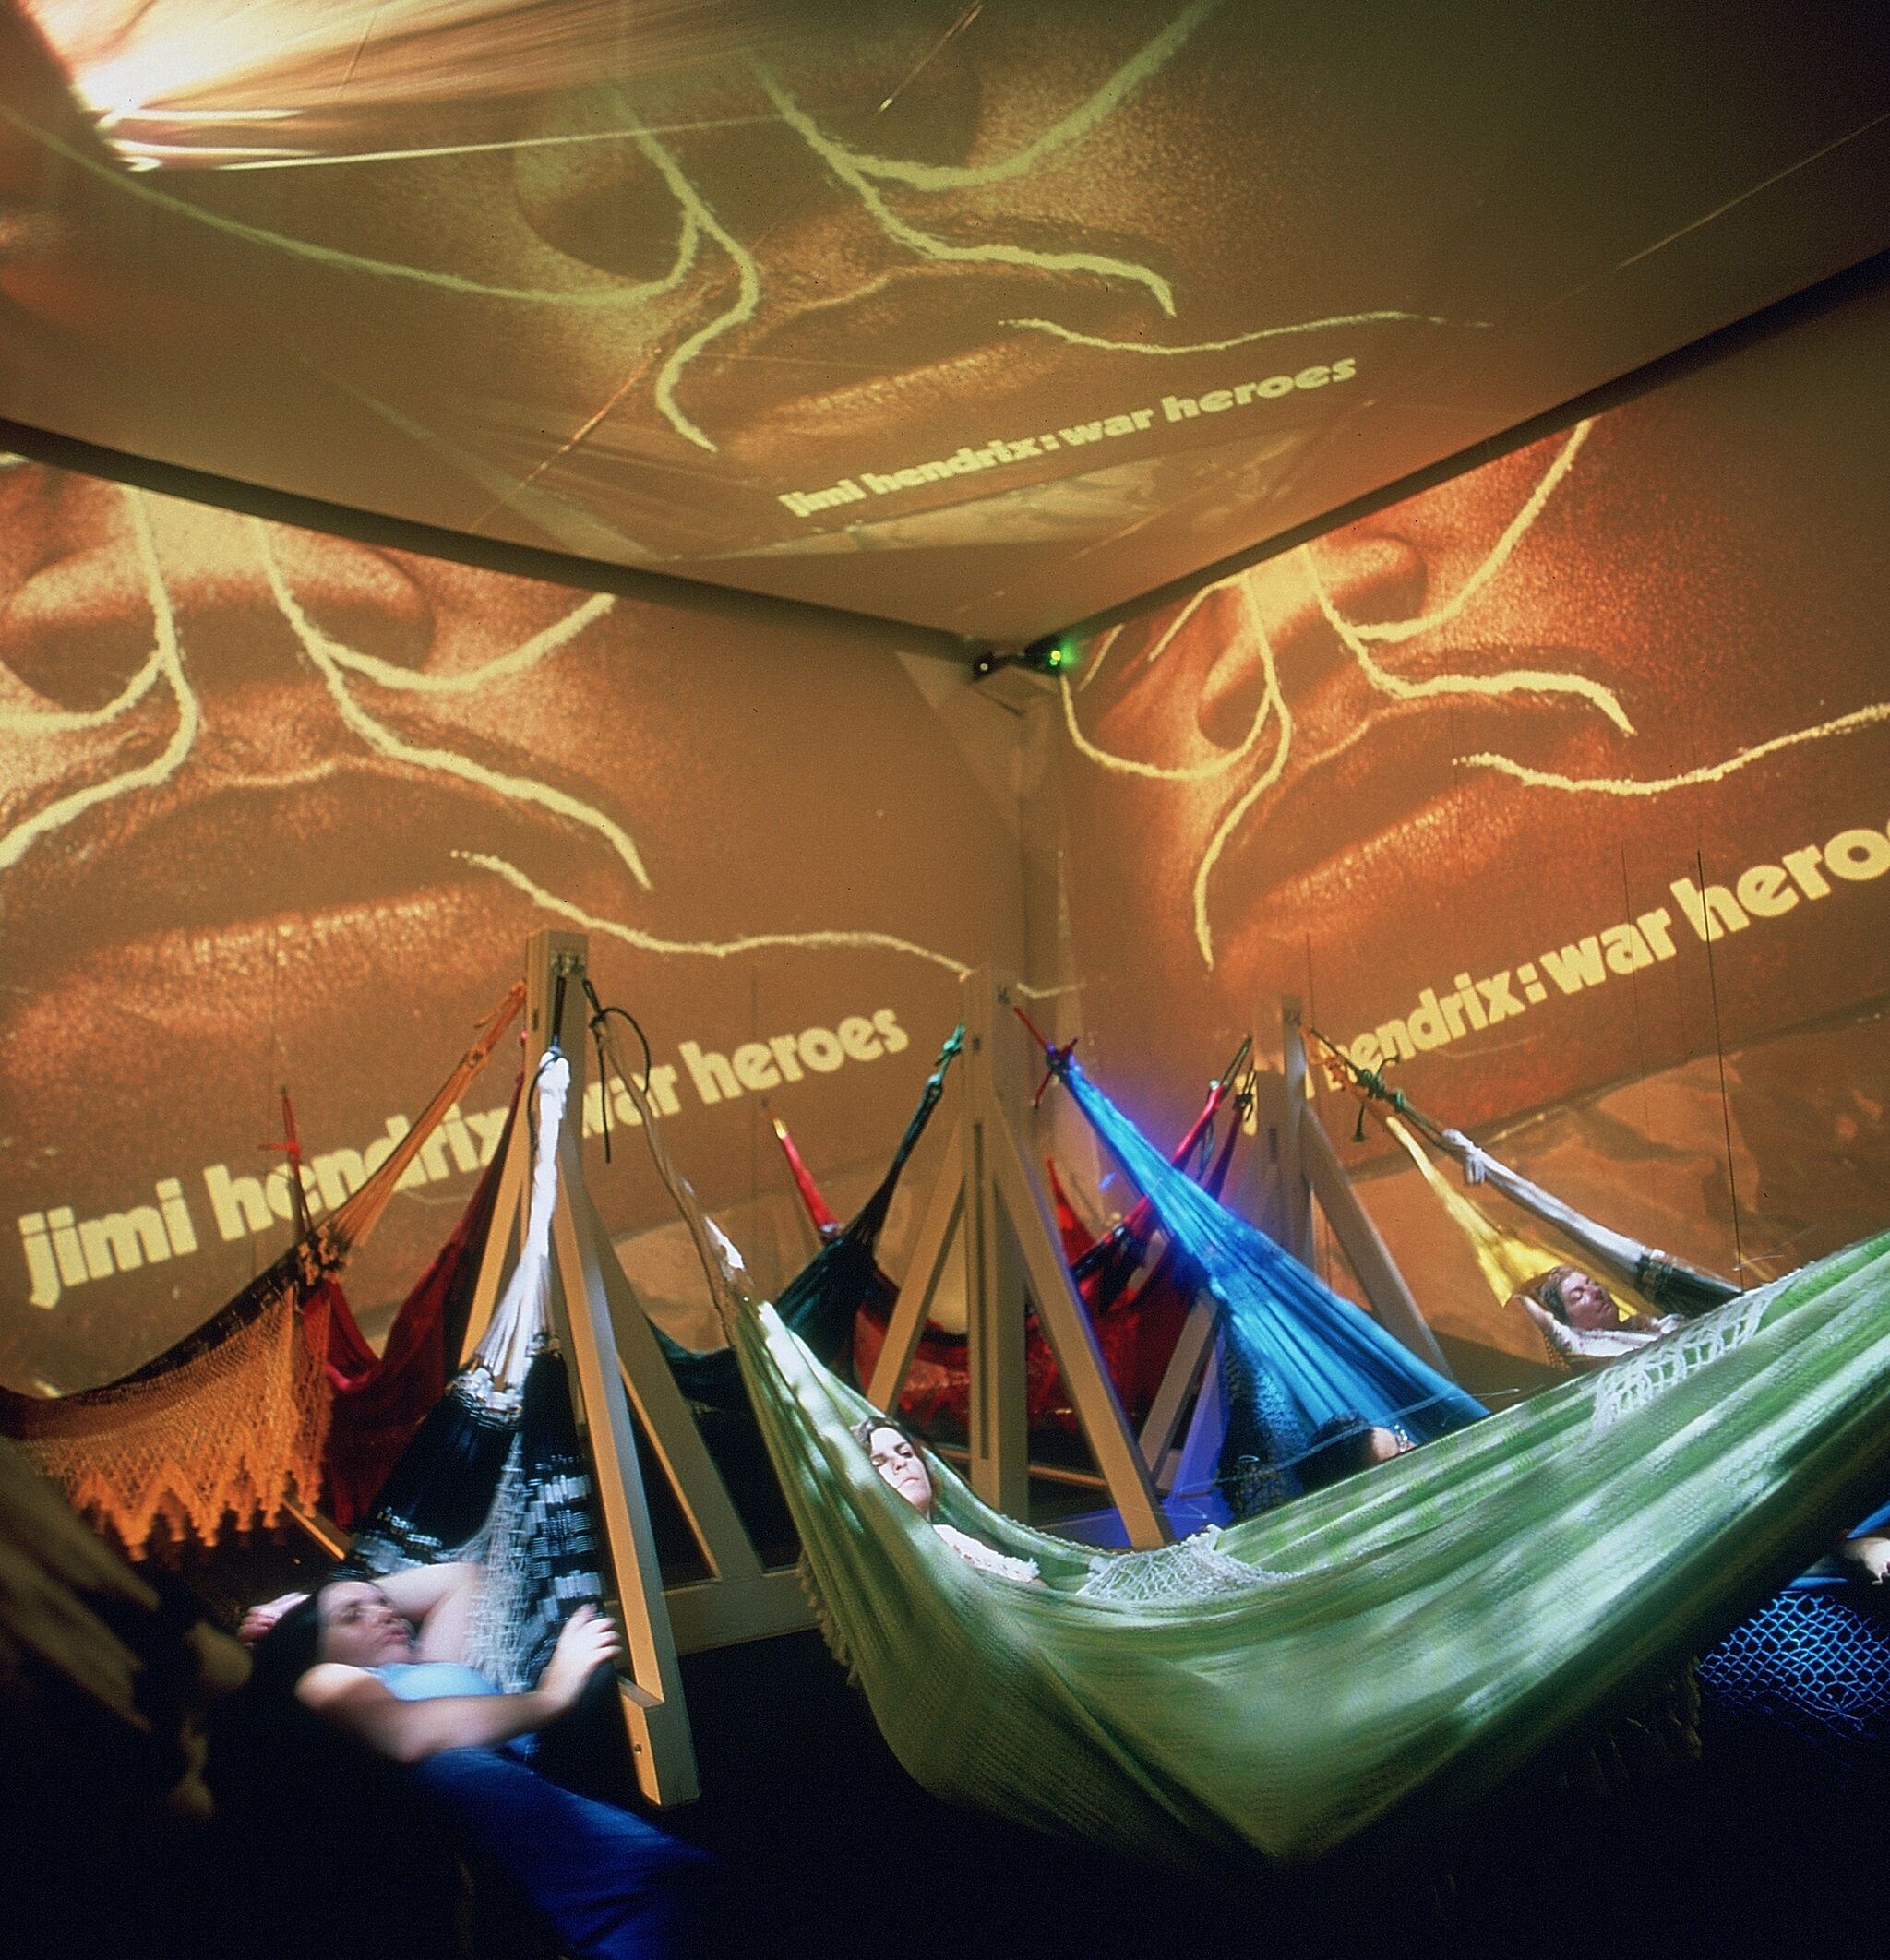 People lay in multicolored hammocks with projections on the walls behind them.